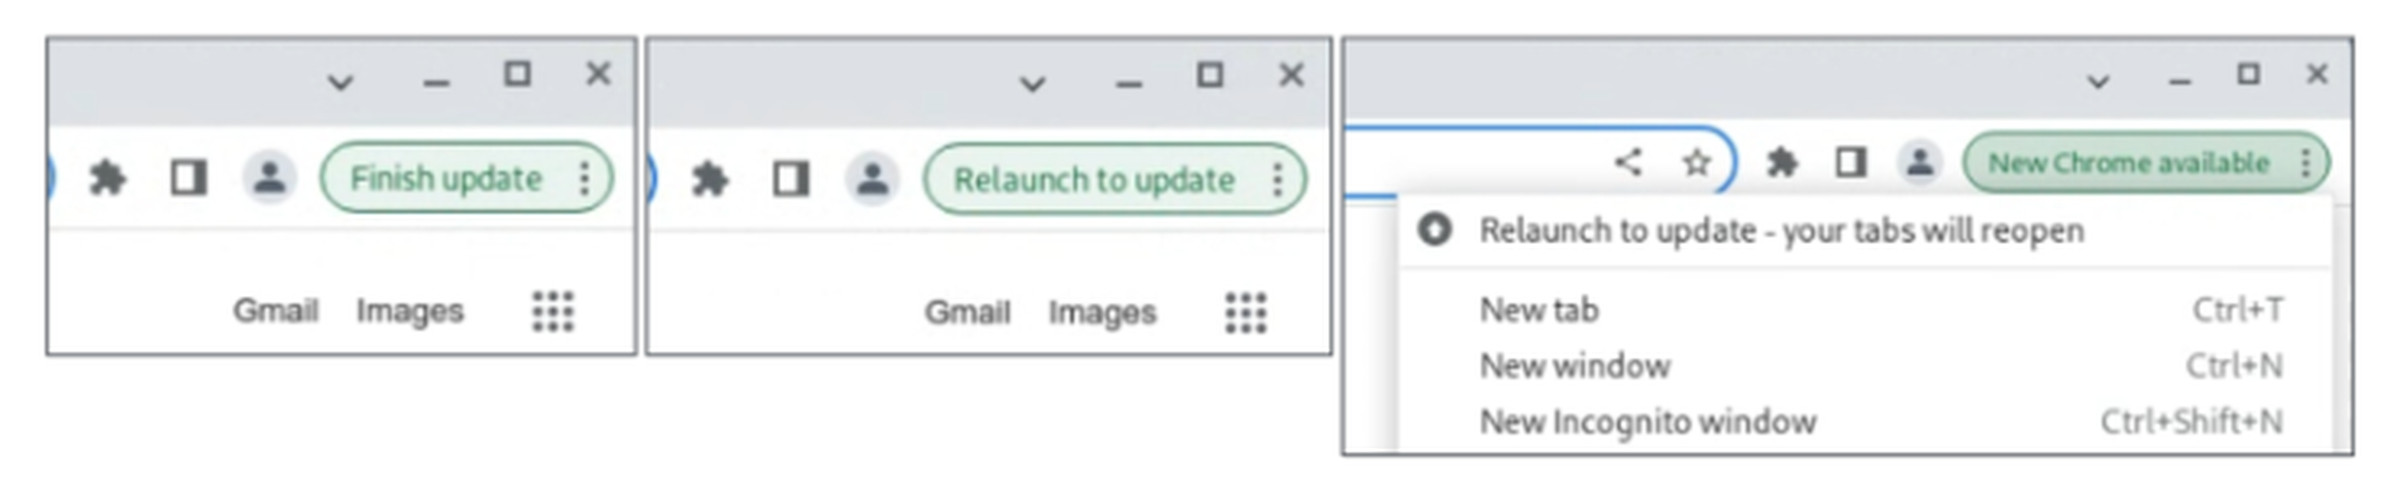 windows of chrome with menu coming from green update available banner